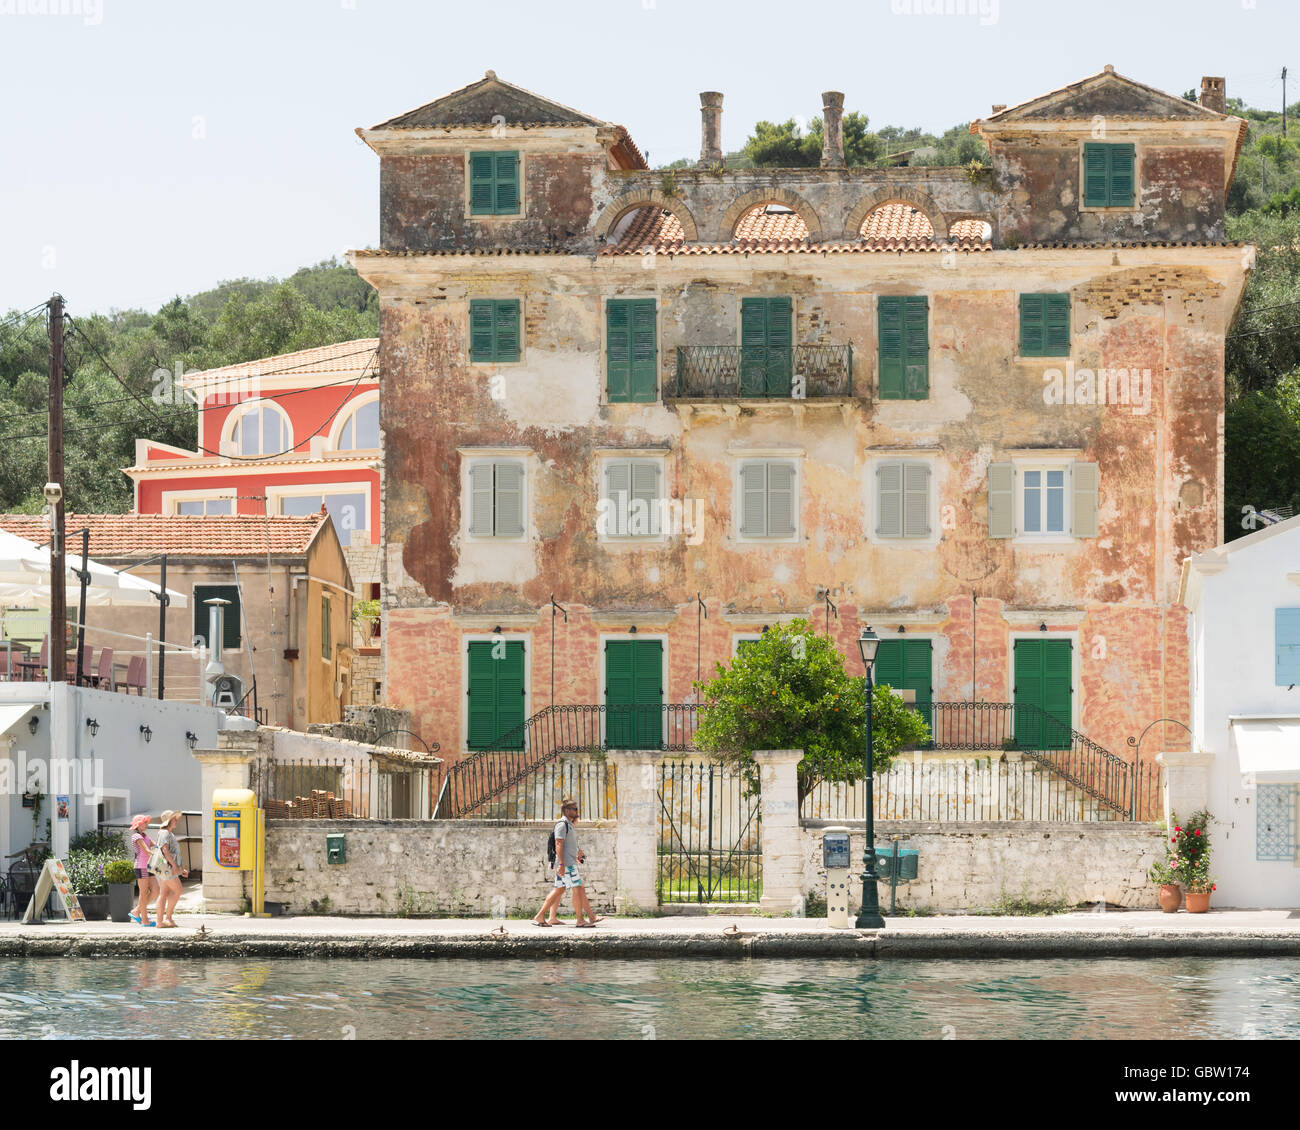 The old Governors House building - now used as holiday apartments, Gaios, Paxos, Greece Stock Photo